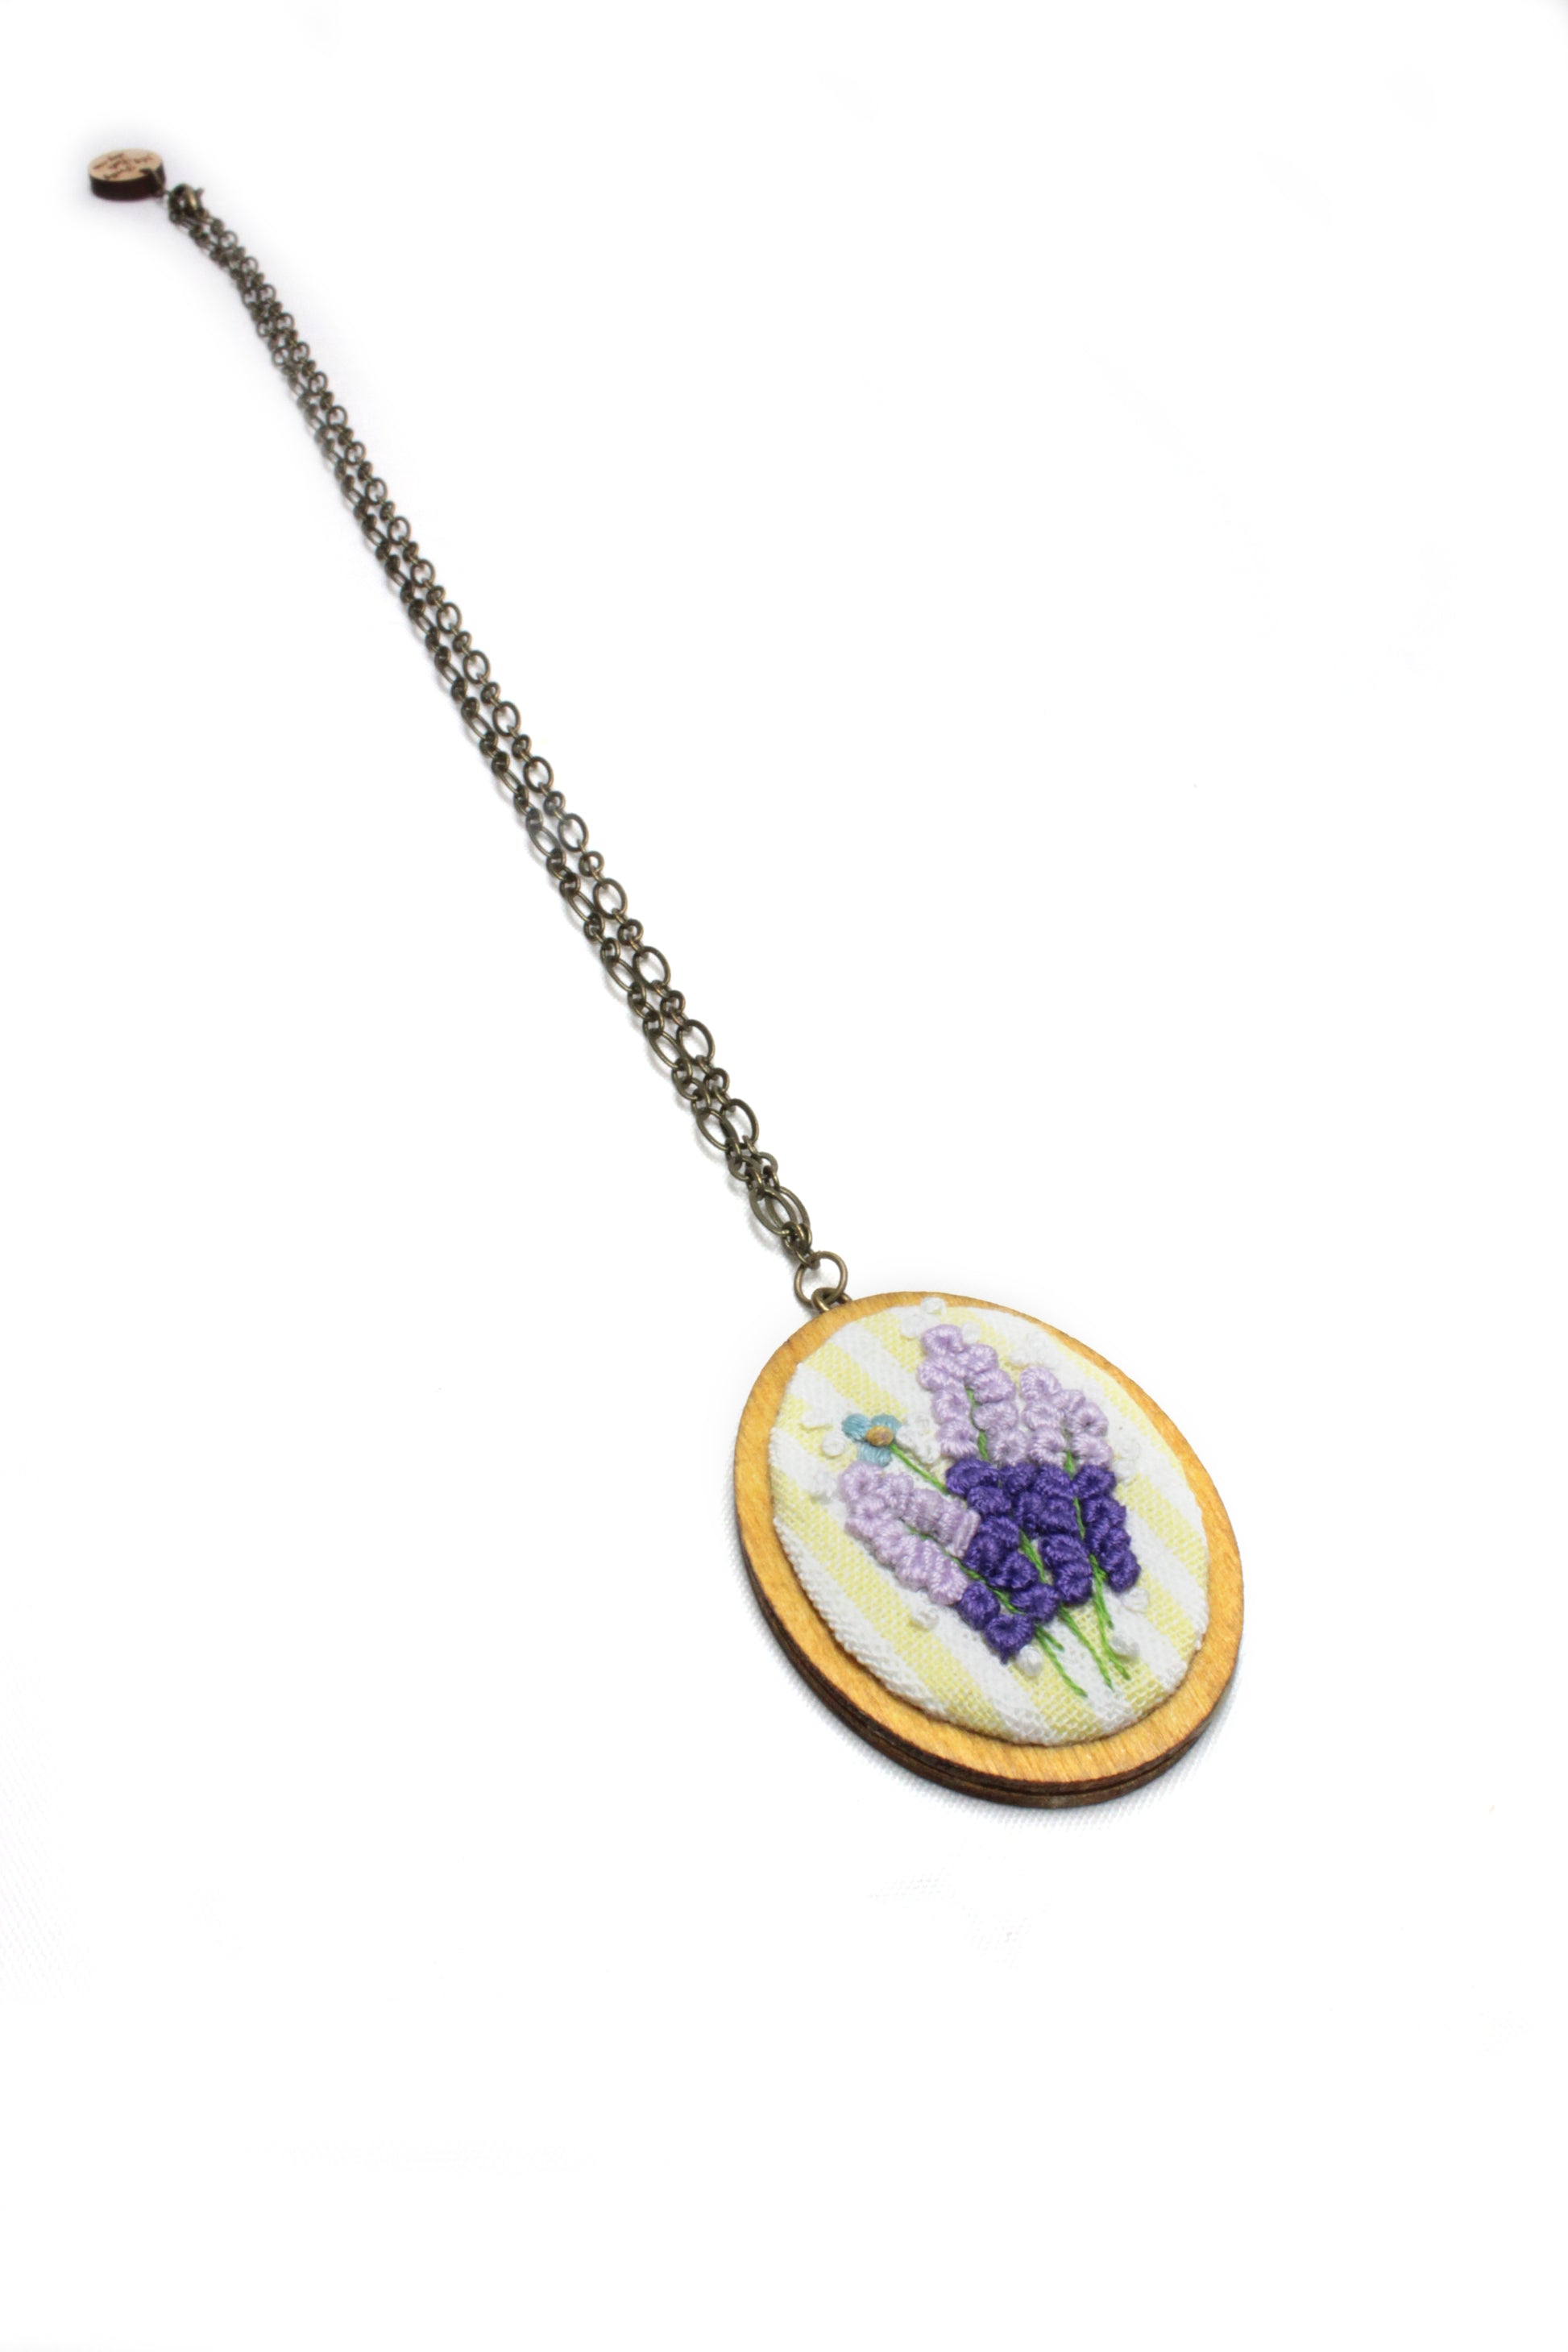 Embroidery Lavender Flower Necklace